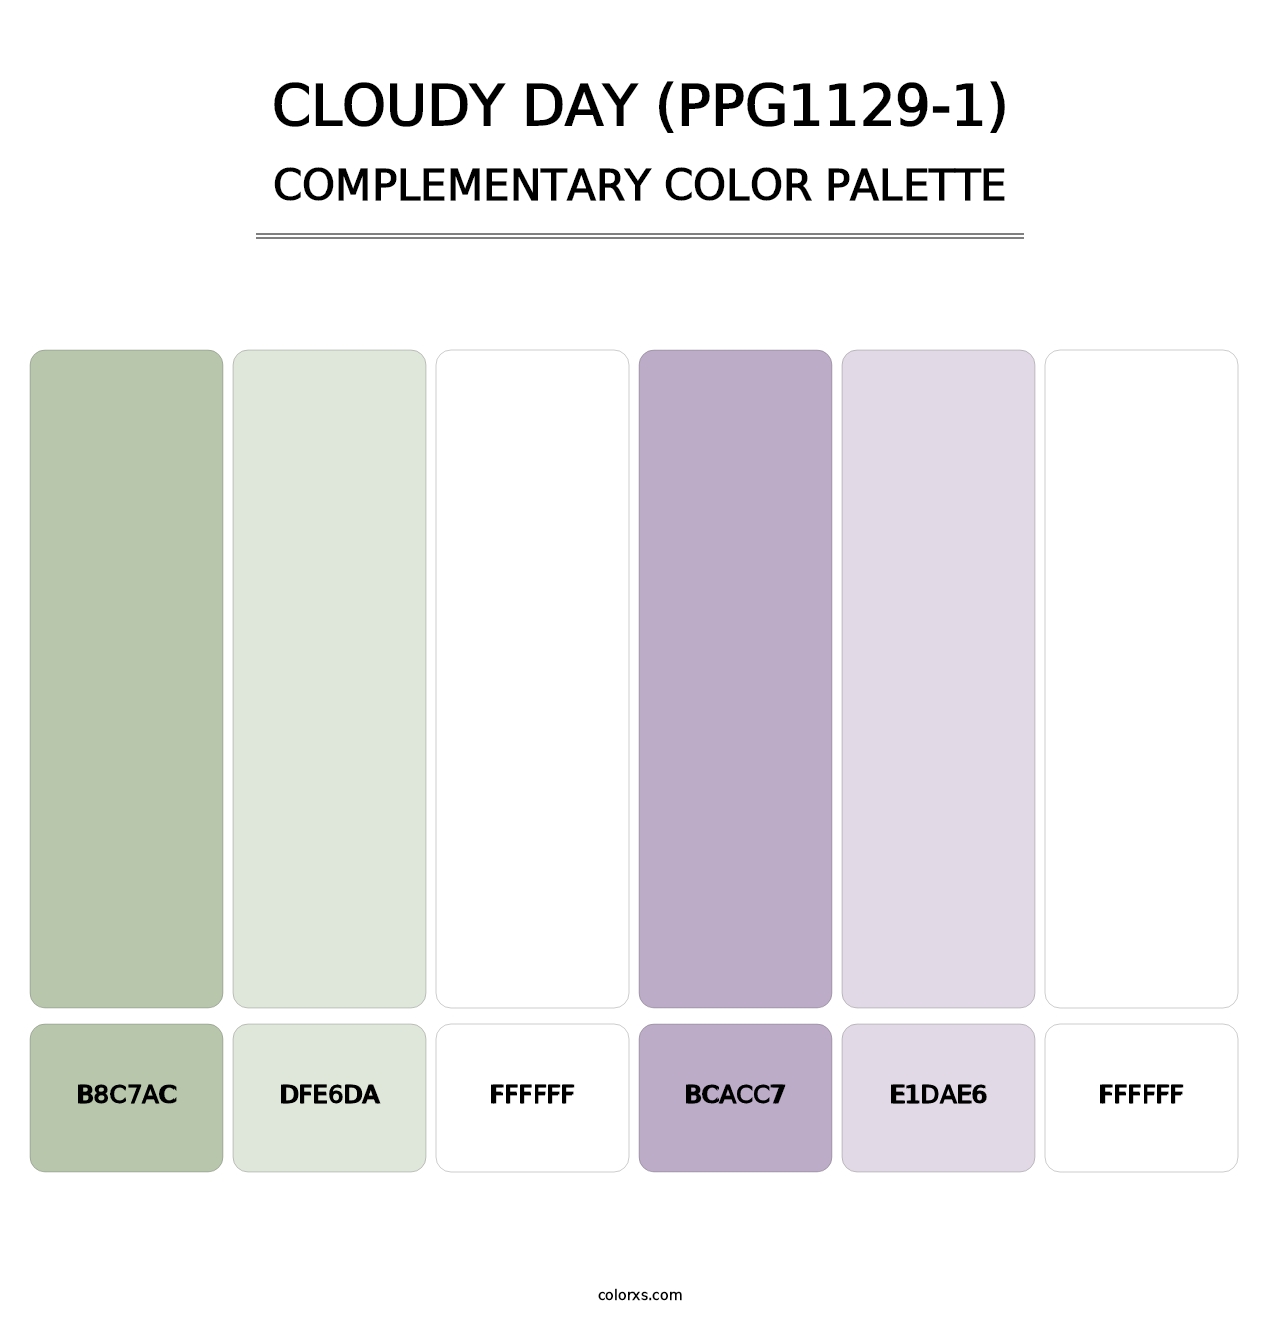 Cloudy Day (PPG1129-1) - Complementary Color Palette